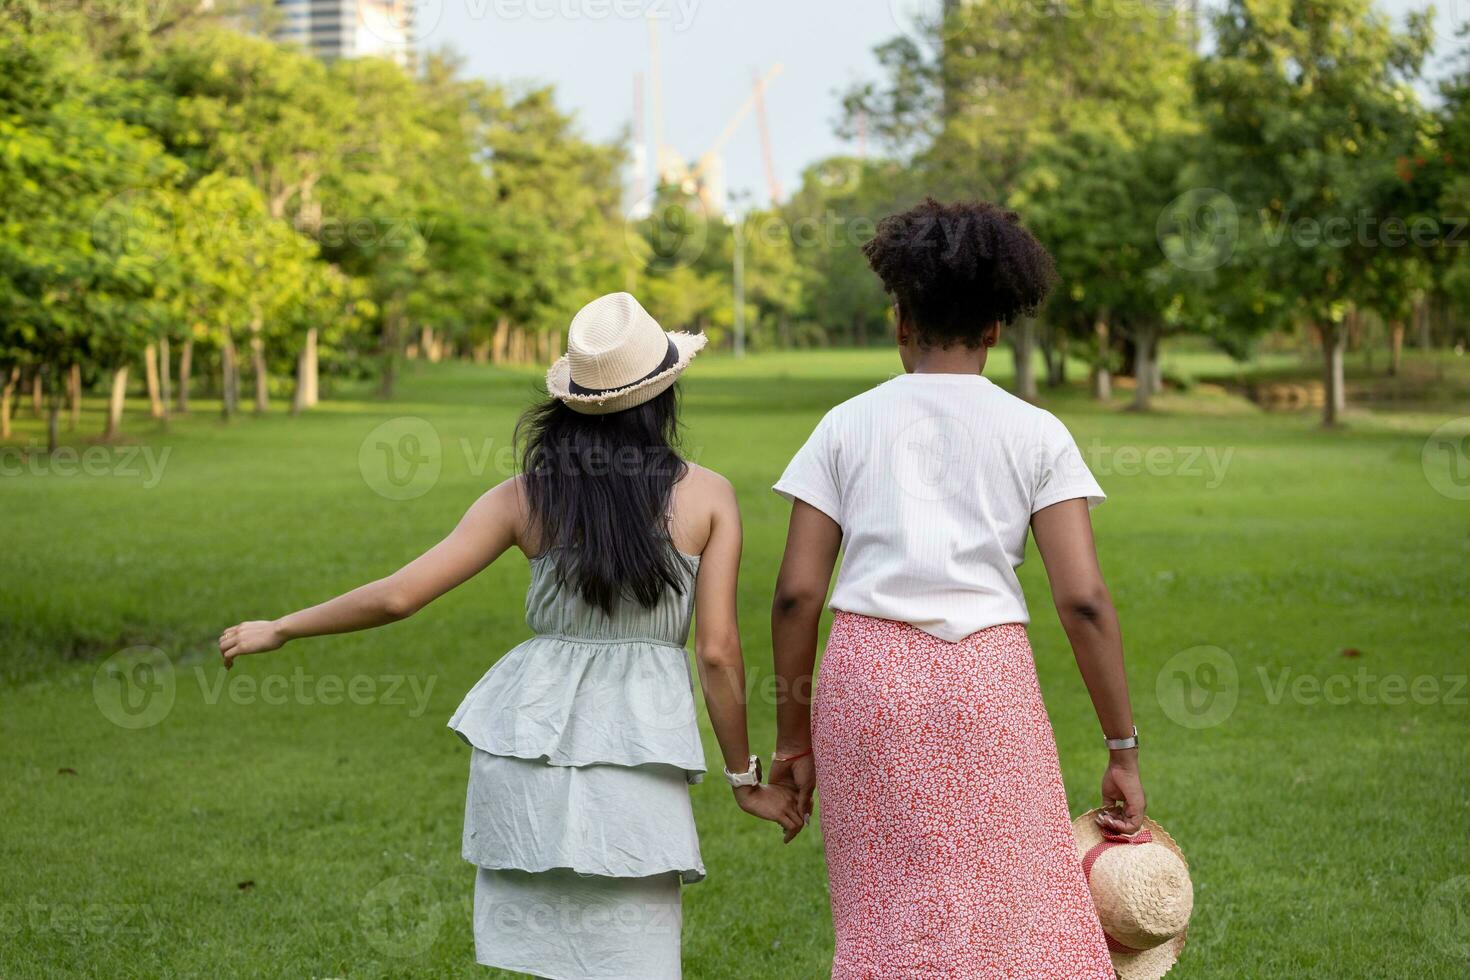 Diversity of LGBTQ lesbian couple is relaxingly holding their hand together in public park during summer season to enjoy the leisure time for coming out of closet and inclusion photo